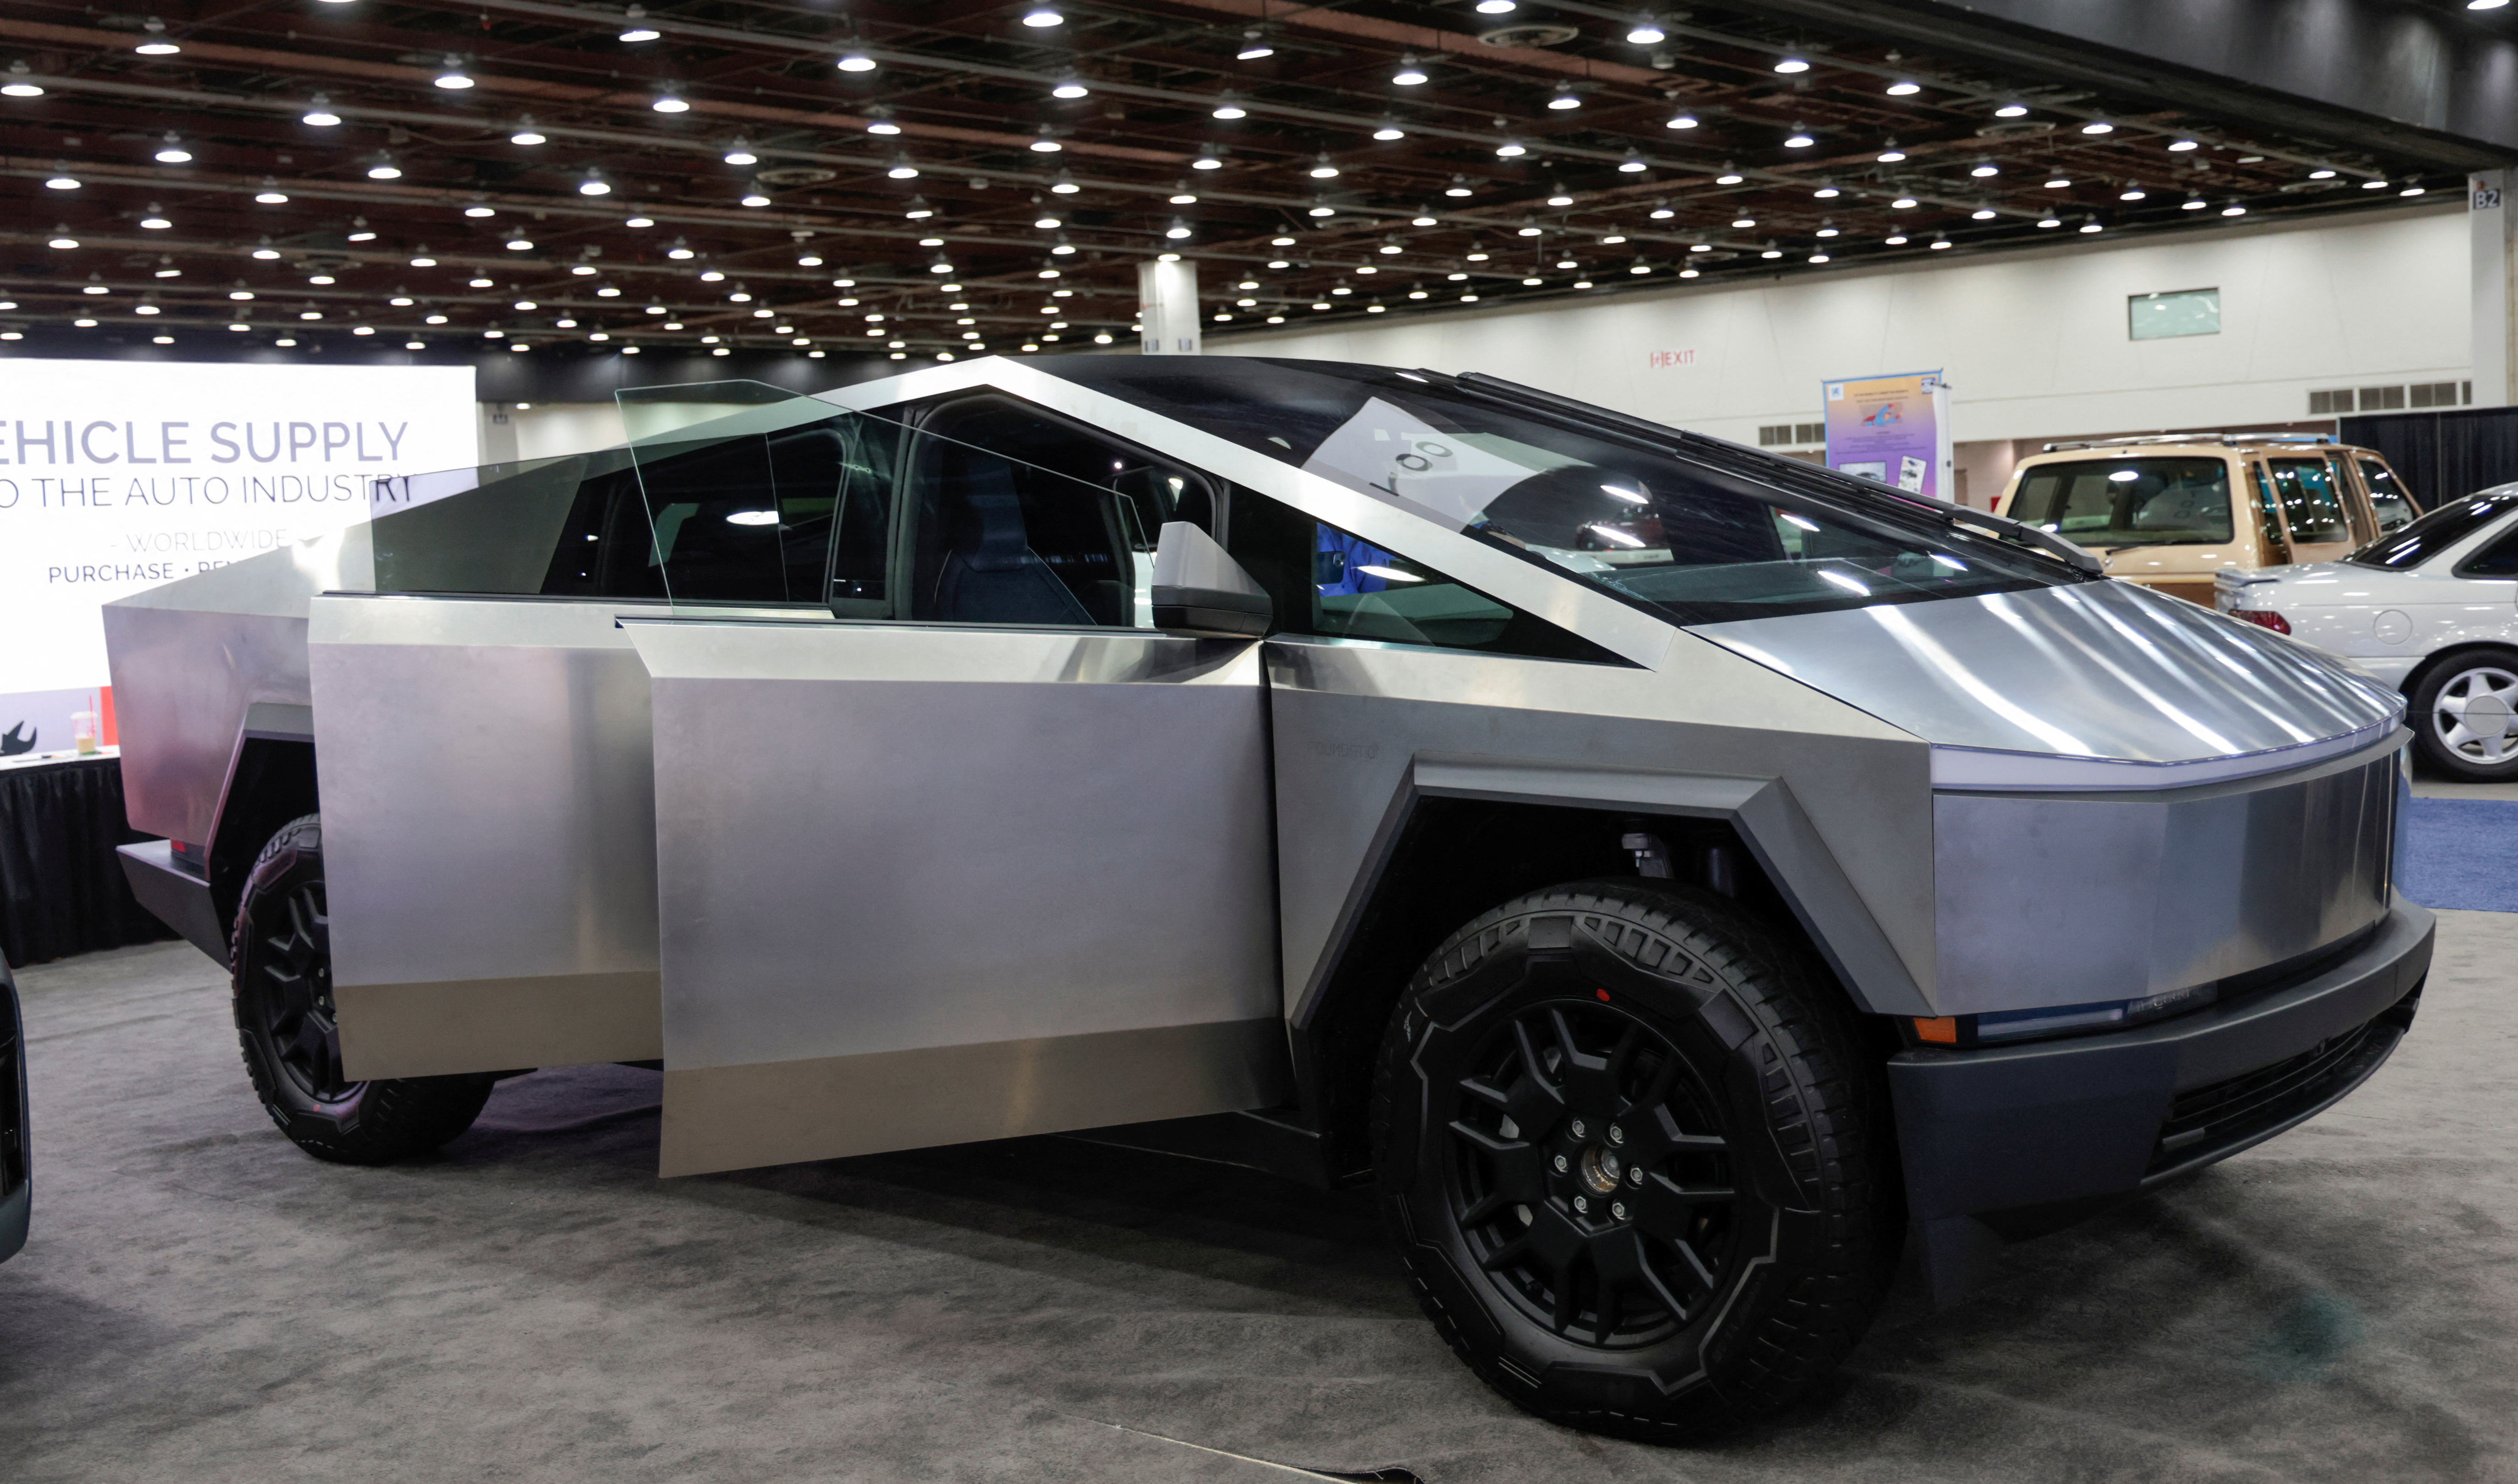 The Tesla Cybertruck is displayed at the SAE WCX conference in Detroit